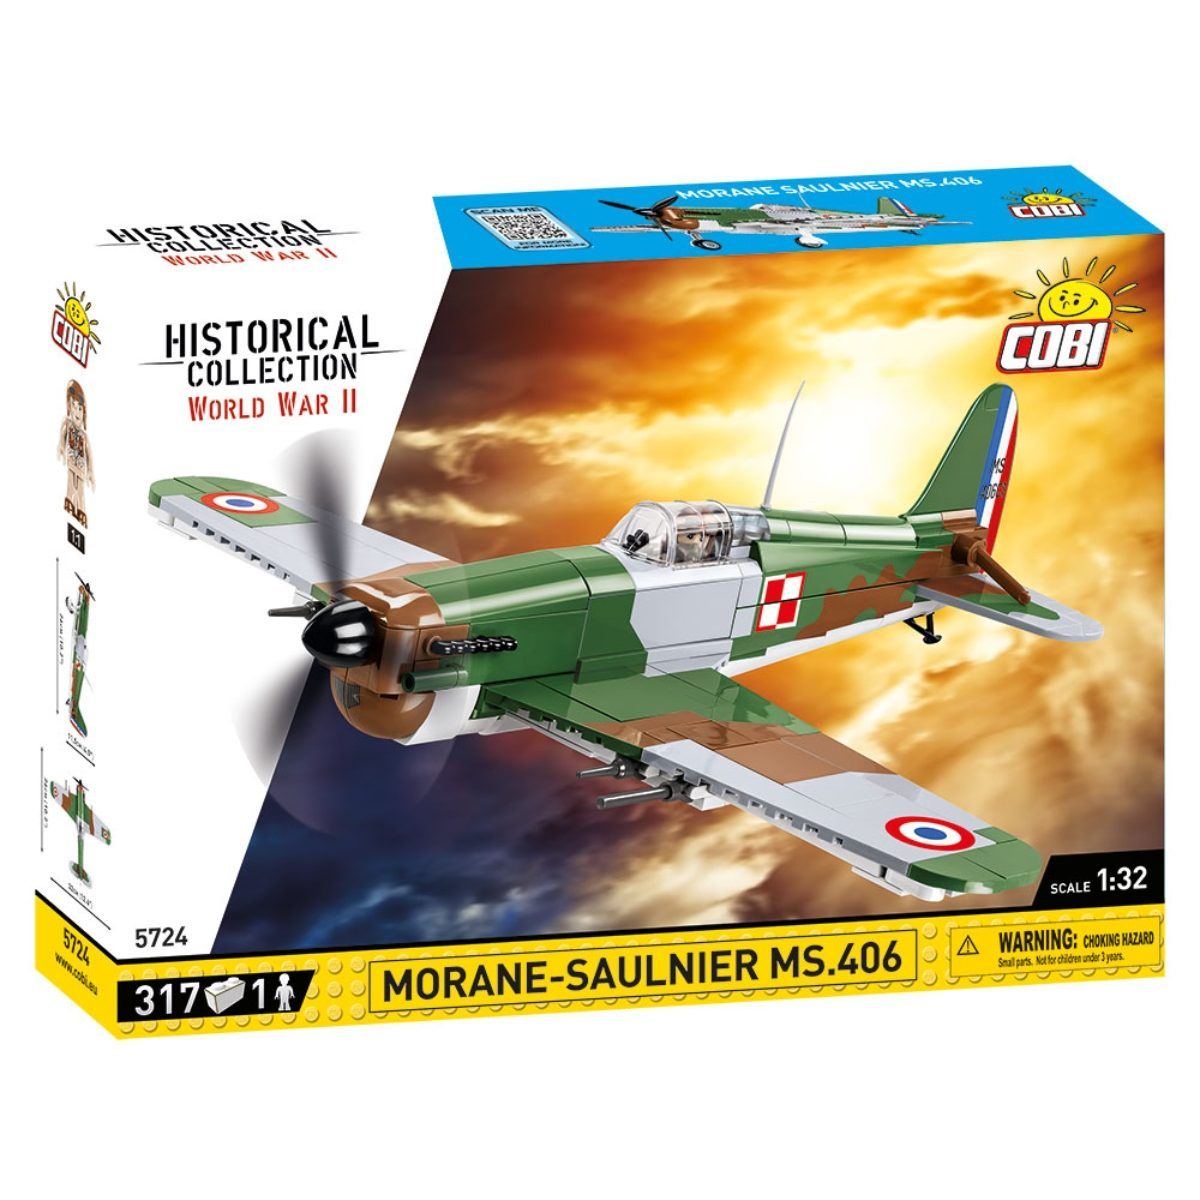 TOY PLAYER Spitfire Fighter Plane Jet Buliding Set, Military Airplanes  Model, Gift for Boys Age 6 7 8 9 10 11 12 and WW2 Military SetCollectors 